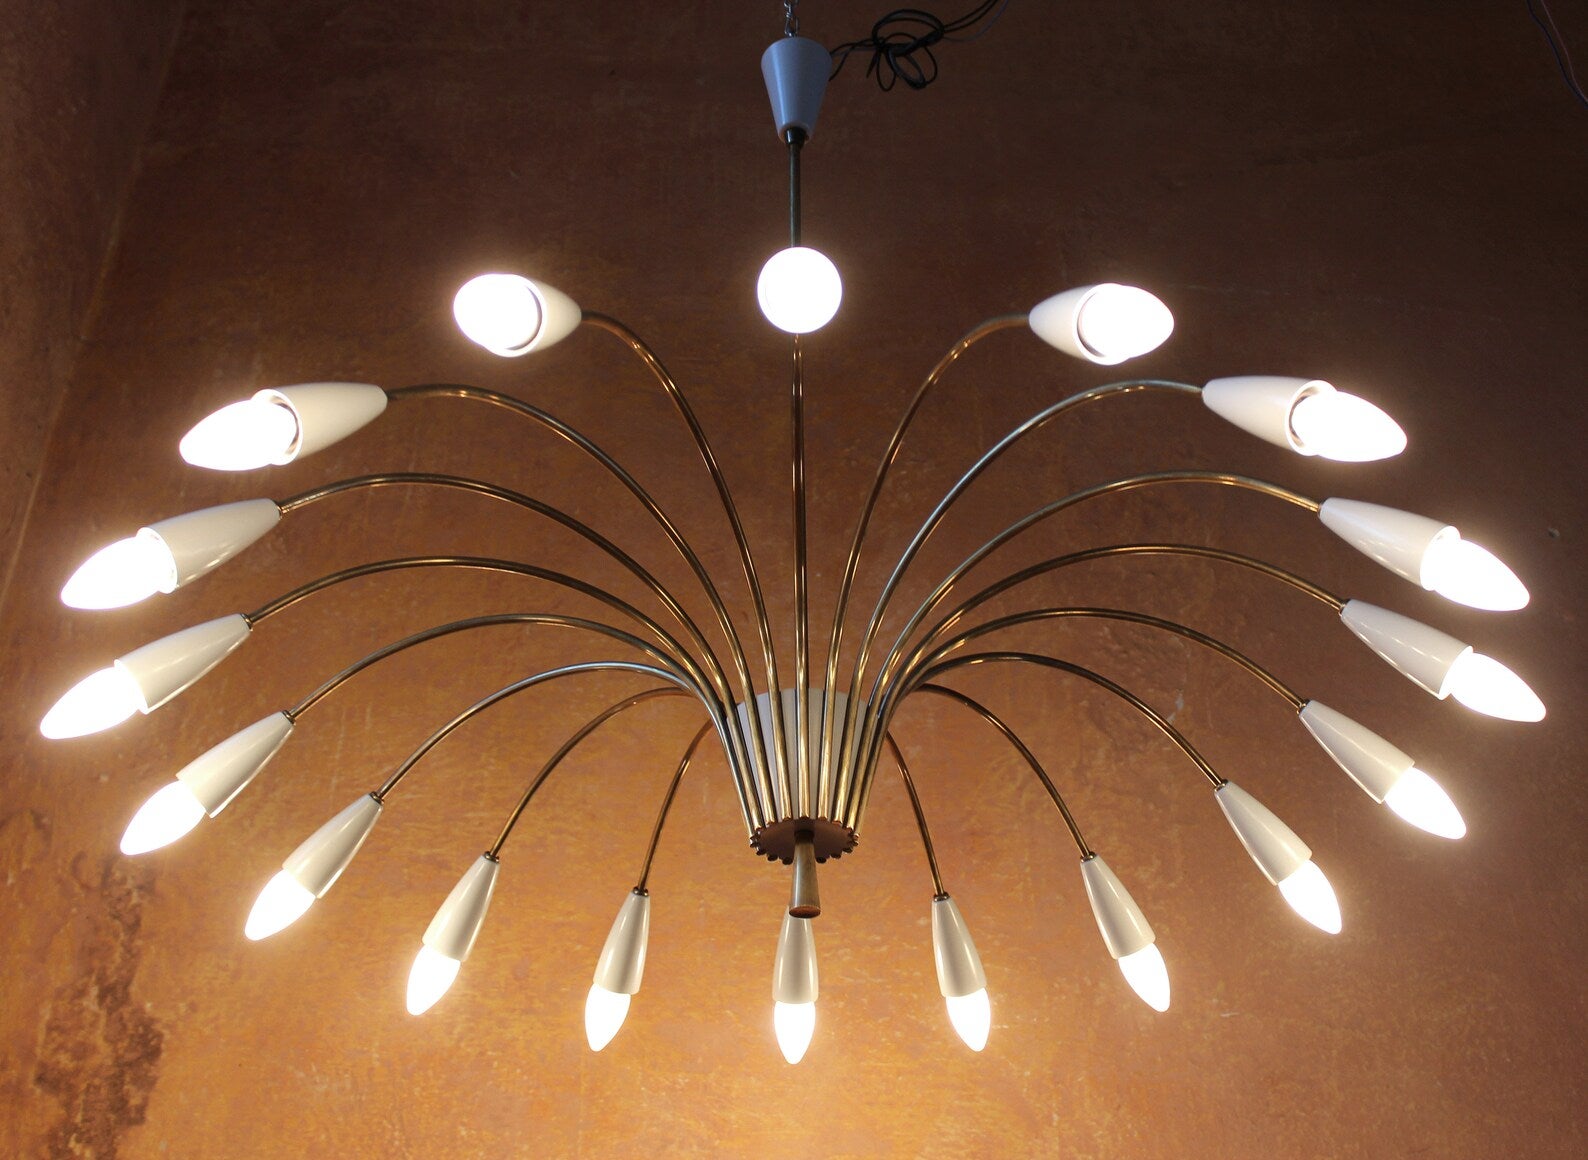 18 LIGHTS SPIDER SPUTNIK CHANDELIER BRASS, GERMANY, 1950s

DIAMETER 3,3 FEET, ORIGINAL HEIGHT 35 INCHES

TREMENDOUS 1950s GERMAN 18 LIGHTS E14 SPUTNIK CHANDELIER BRASS LIGHT GREY ENAMELED REWIRED

The chandelier is in excellent condition, carefully